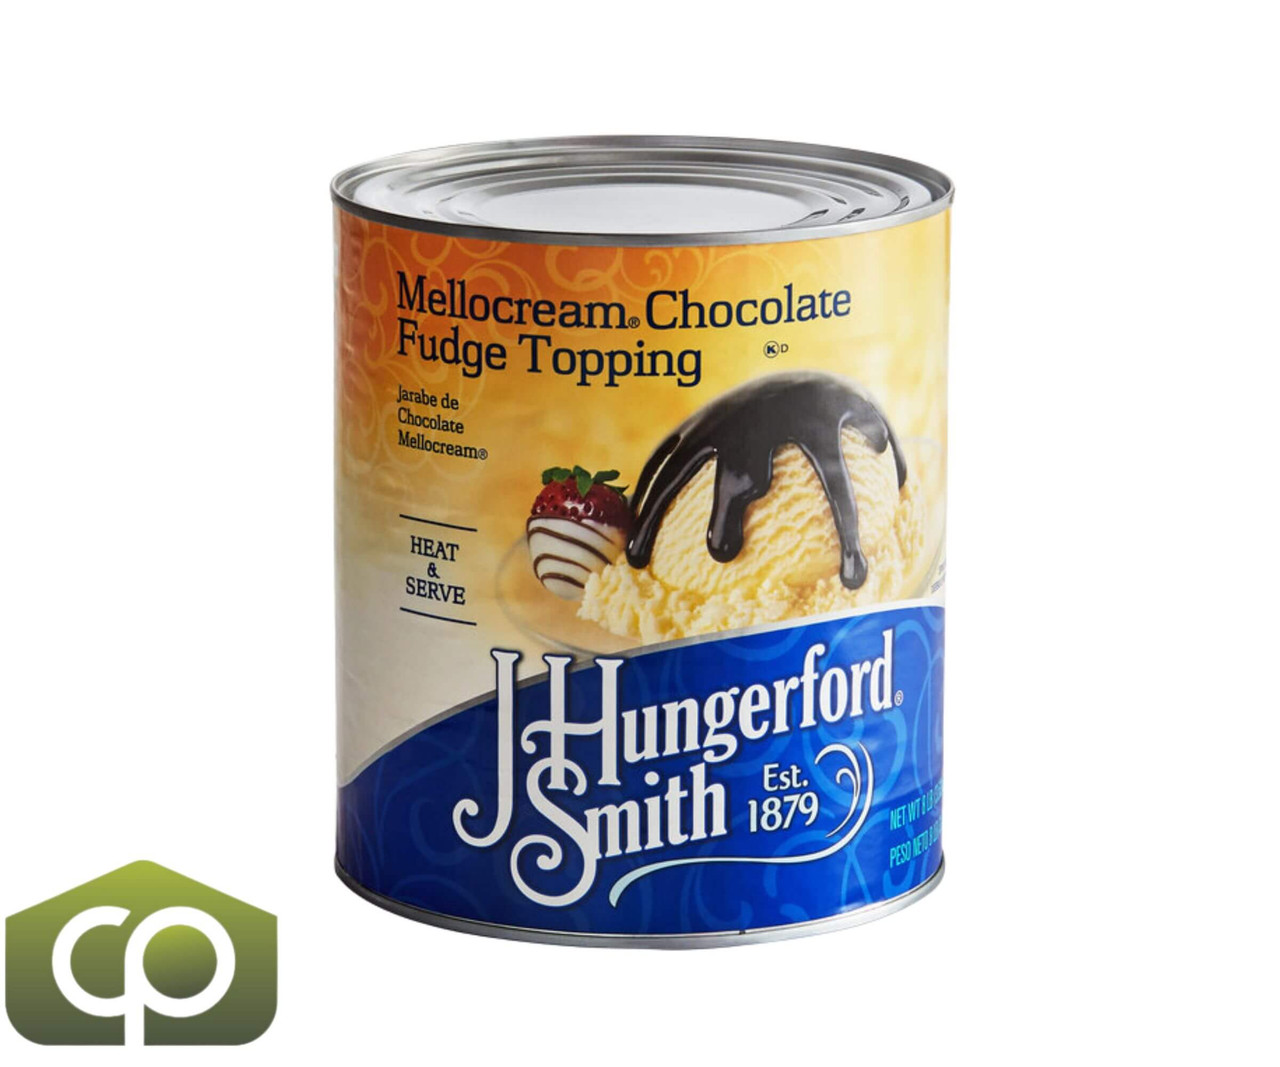 J. Hungerford Smith Mellocream Chocolate Fudge Topping - 54 lb. (24.49 kg)-Chicken Pieces